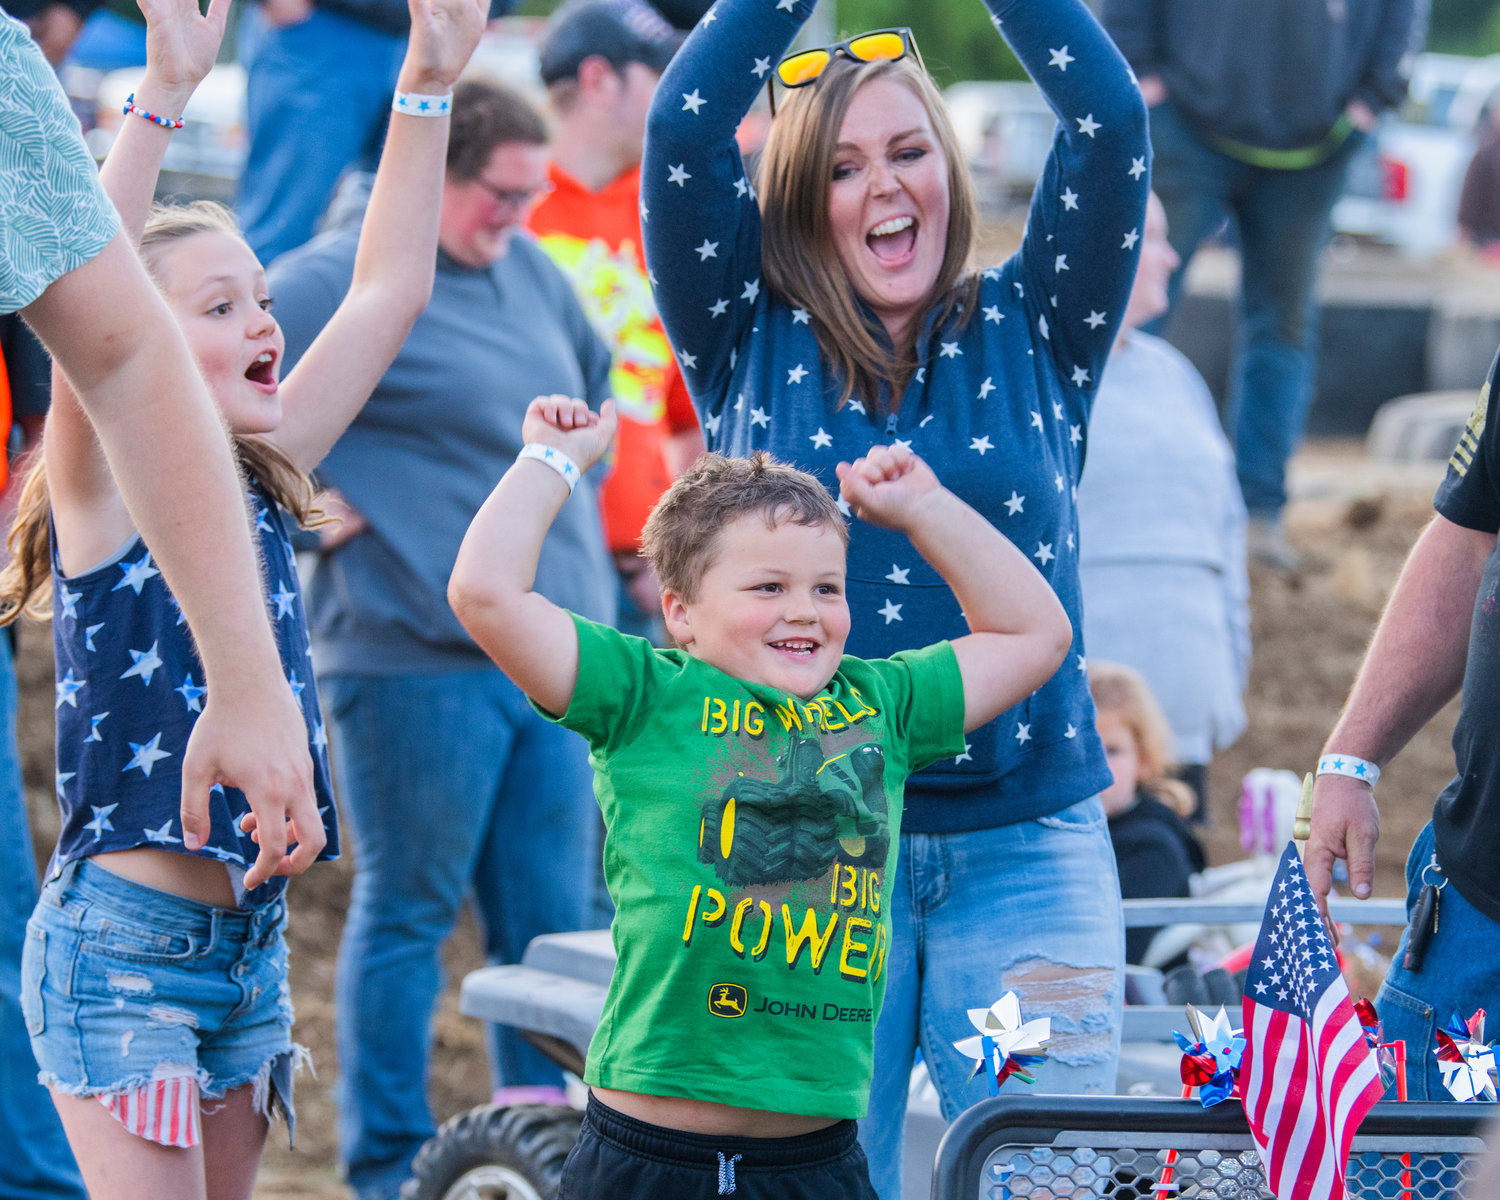 Cooper Burdick smiles and raises his hands after taking second place in the power wheels demolition derby for kids at the Southwest Washington Fairgrounds Sunday night during Summerfest in Centralia.